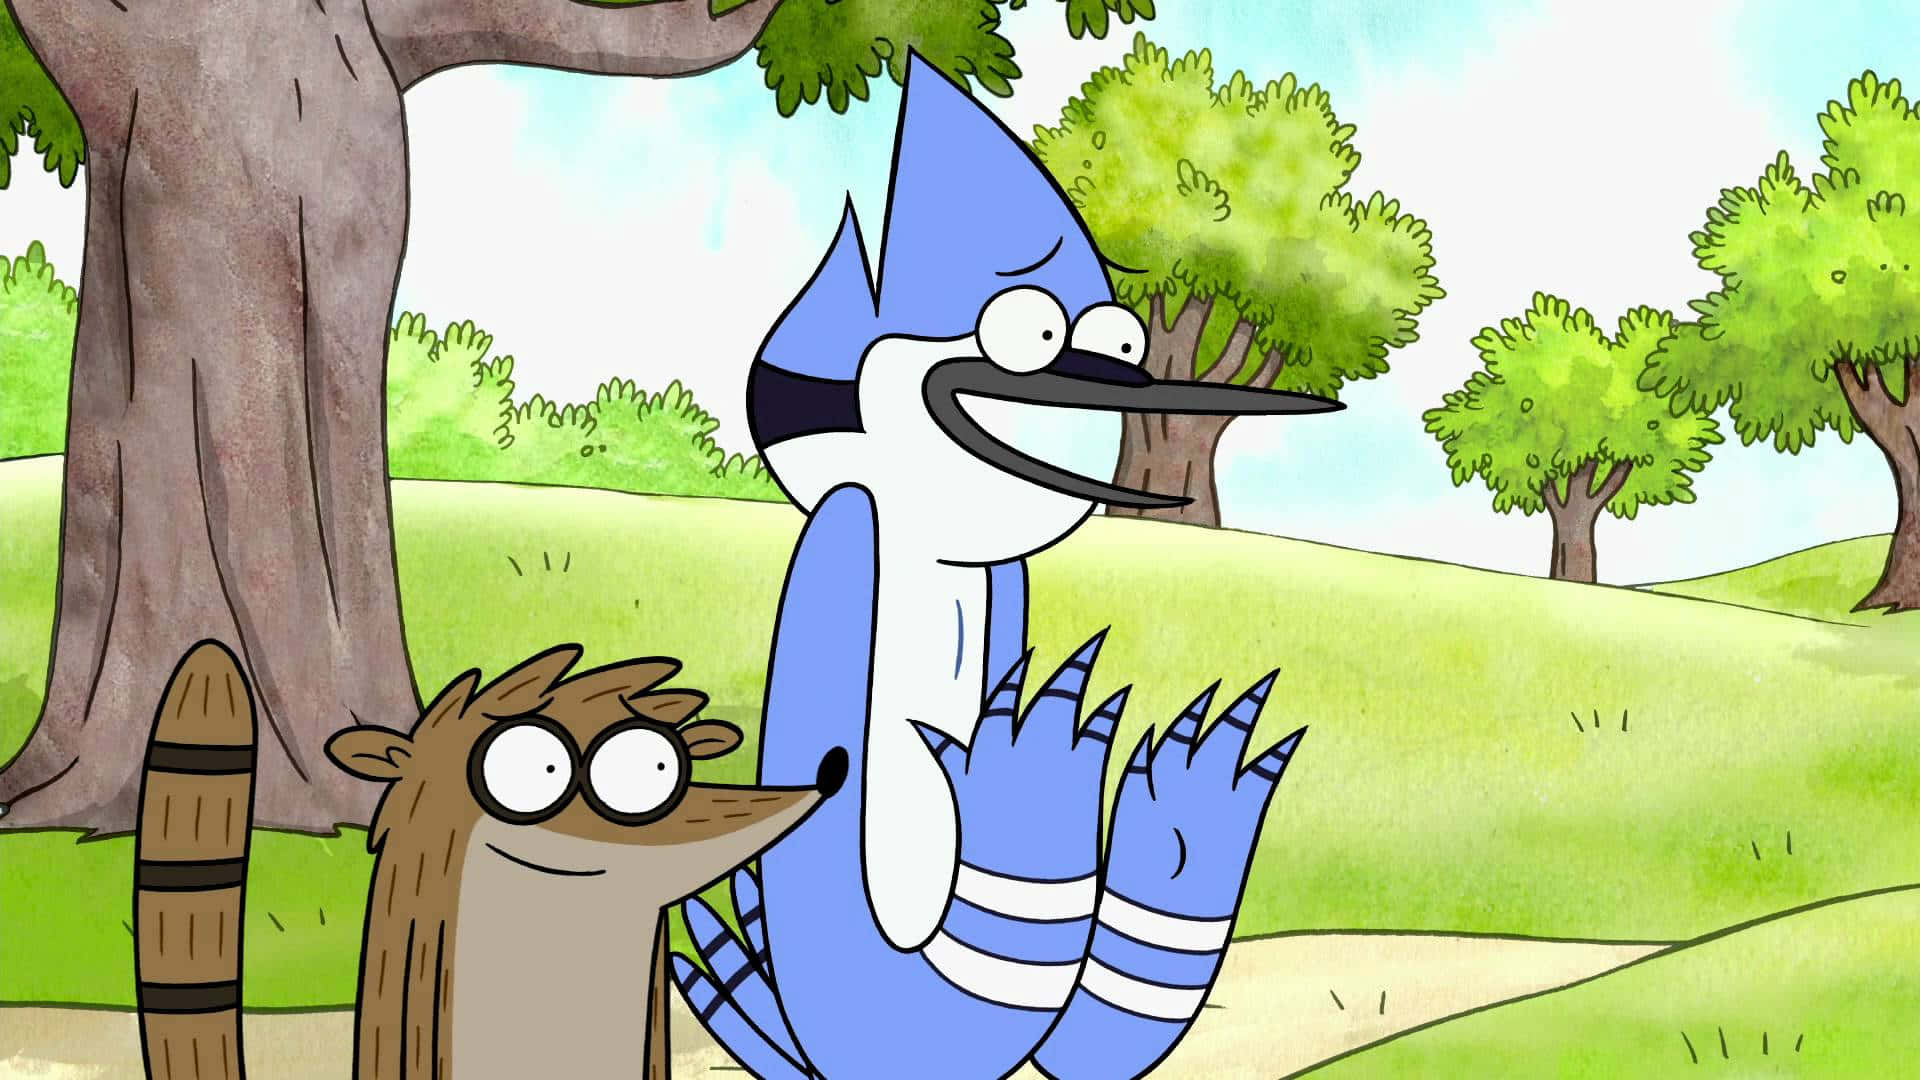 A beautiful 1920x1080 wallpaper featuring the main characters of Regular Show